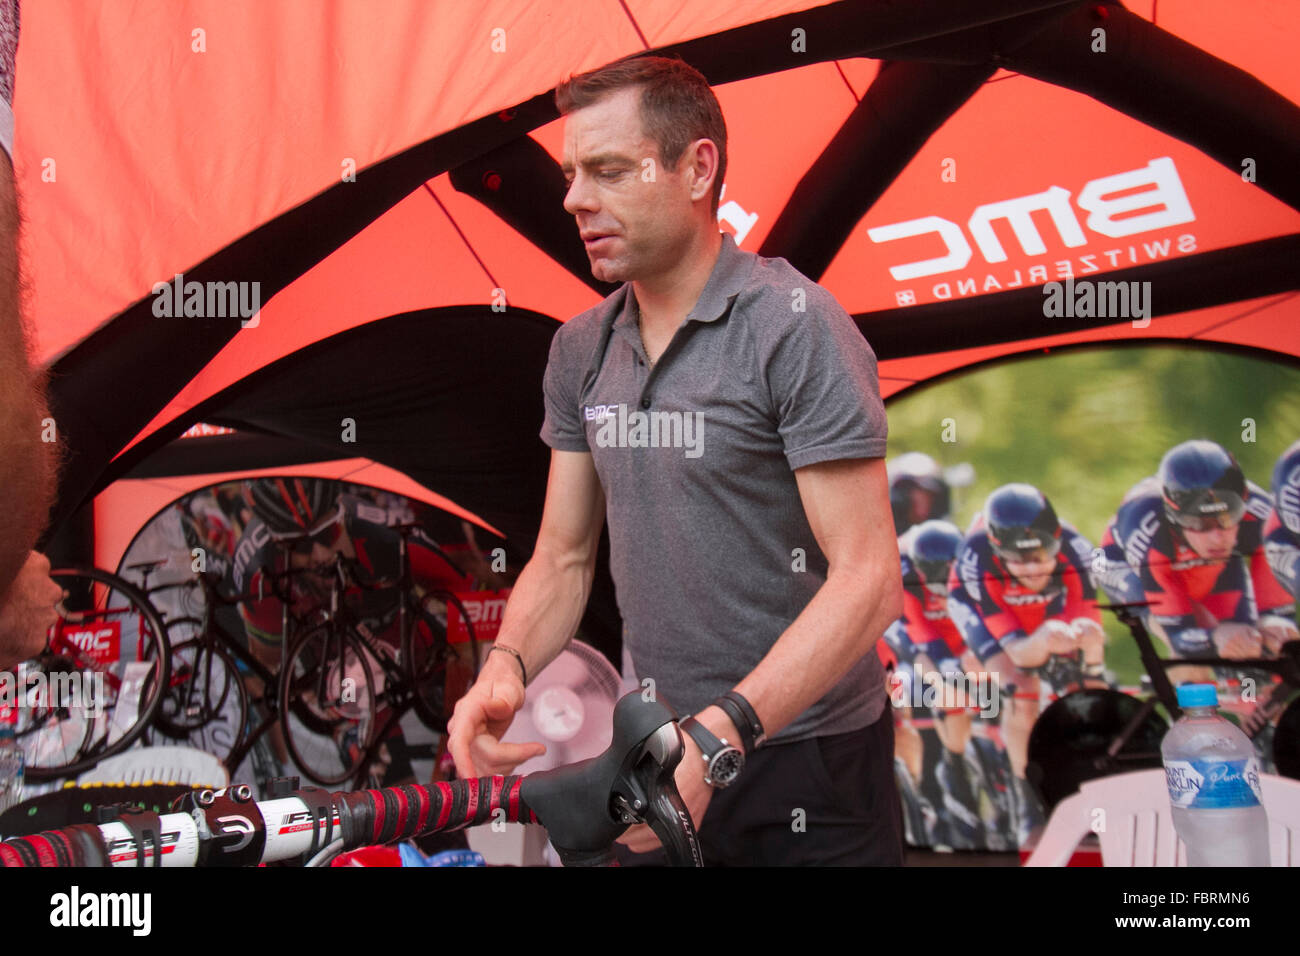 Adelaide, Australia. 19th Jan, 2016. Cadel Evans who became the first Australian in 2011 to win the Tour de France cycling race signs autographs at the Tour Down Under village Credit:  amer ghazzal/Alamy Live News Stock Photo